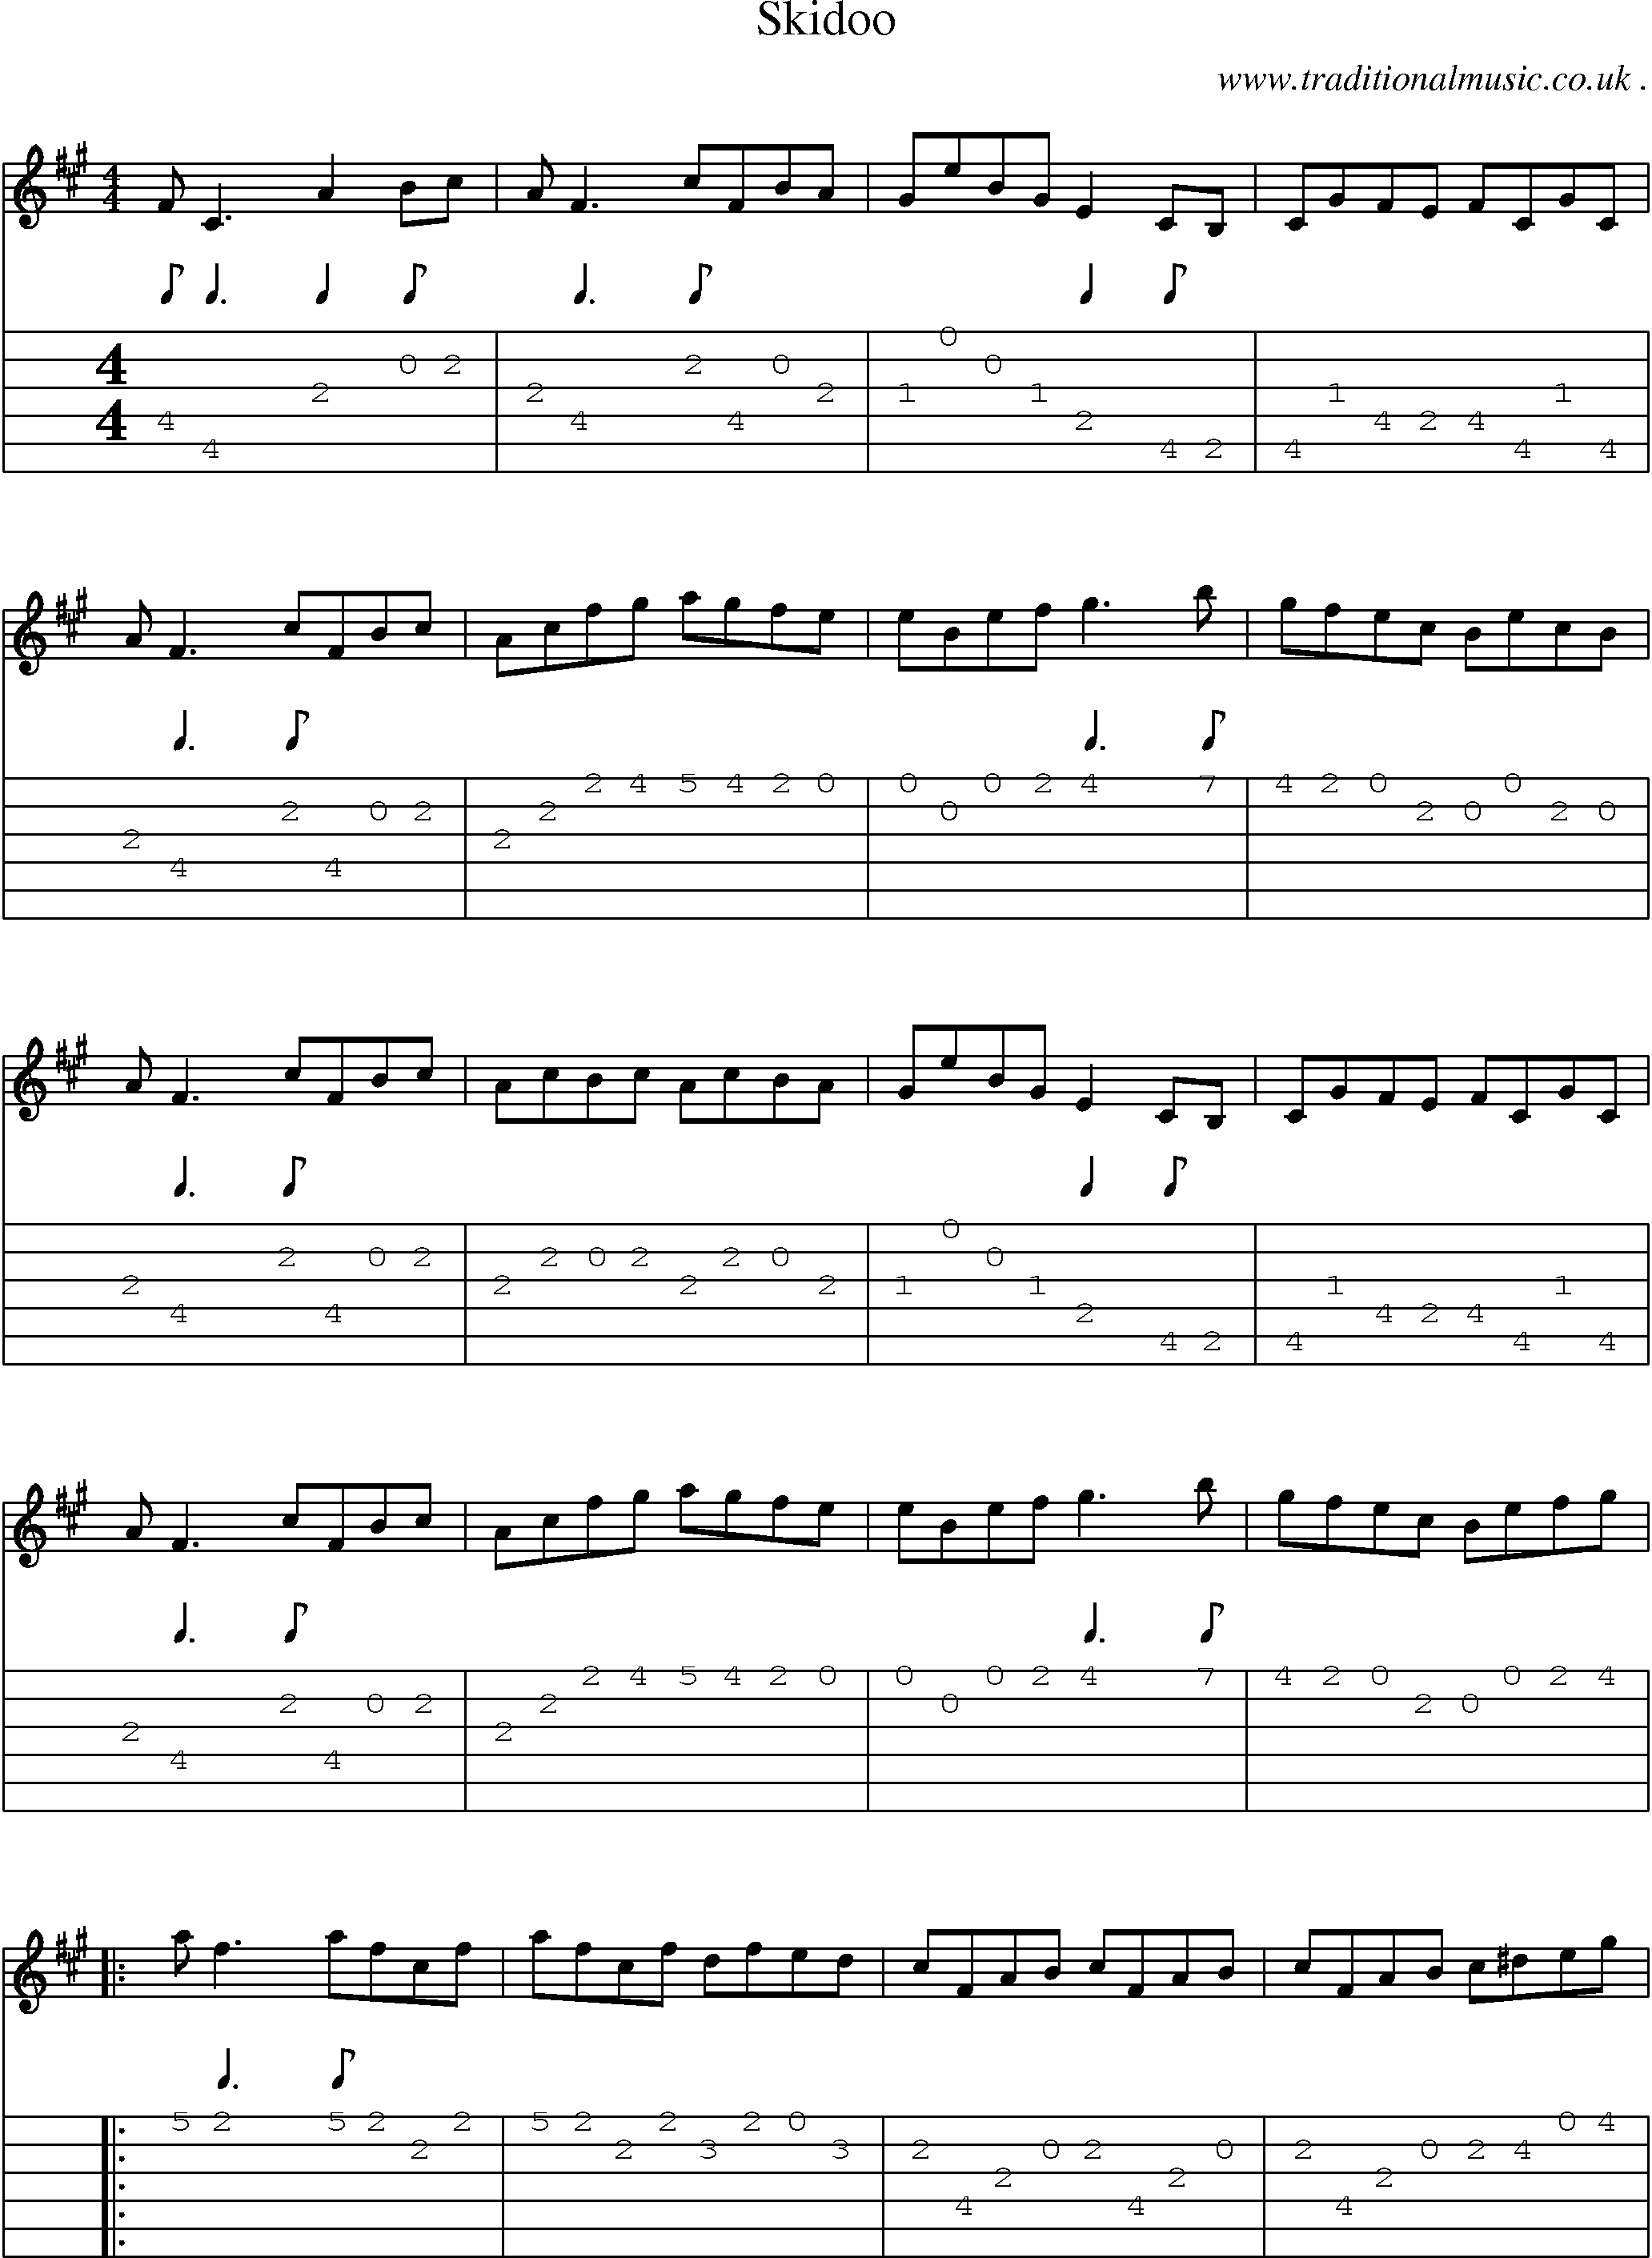 Sheet-Music and Guitar Tabs for Skidoo